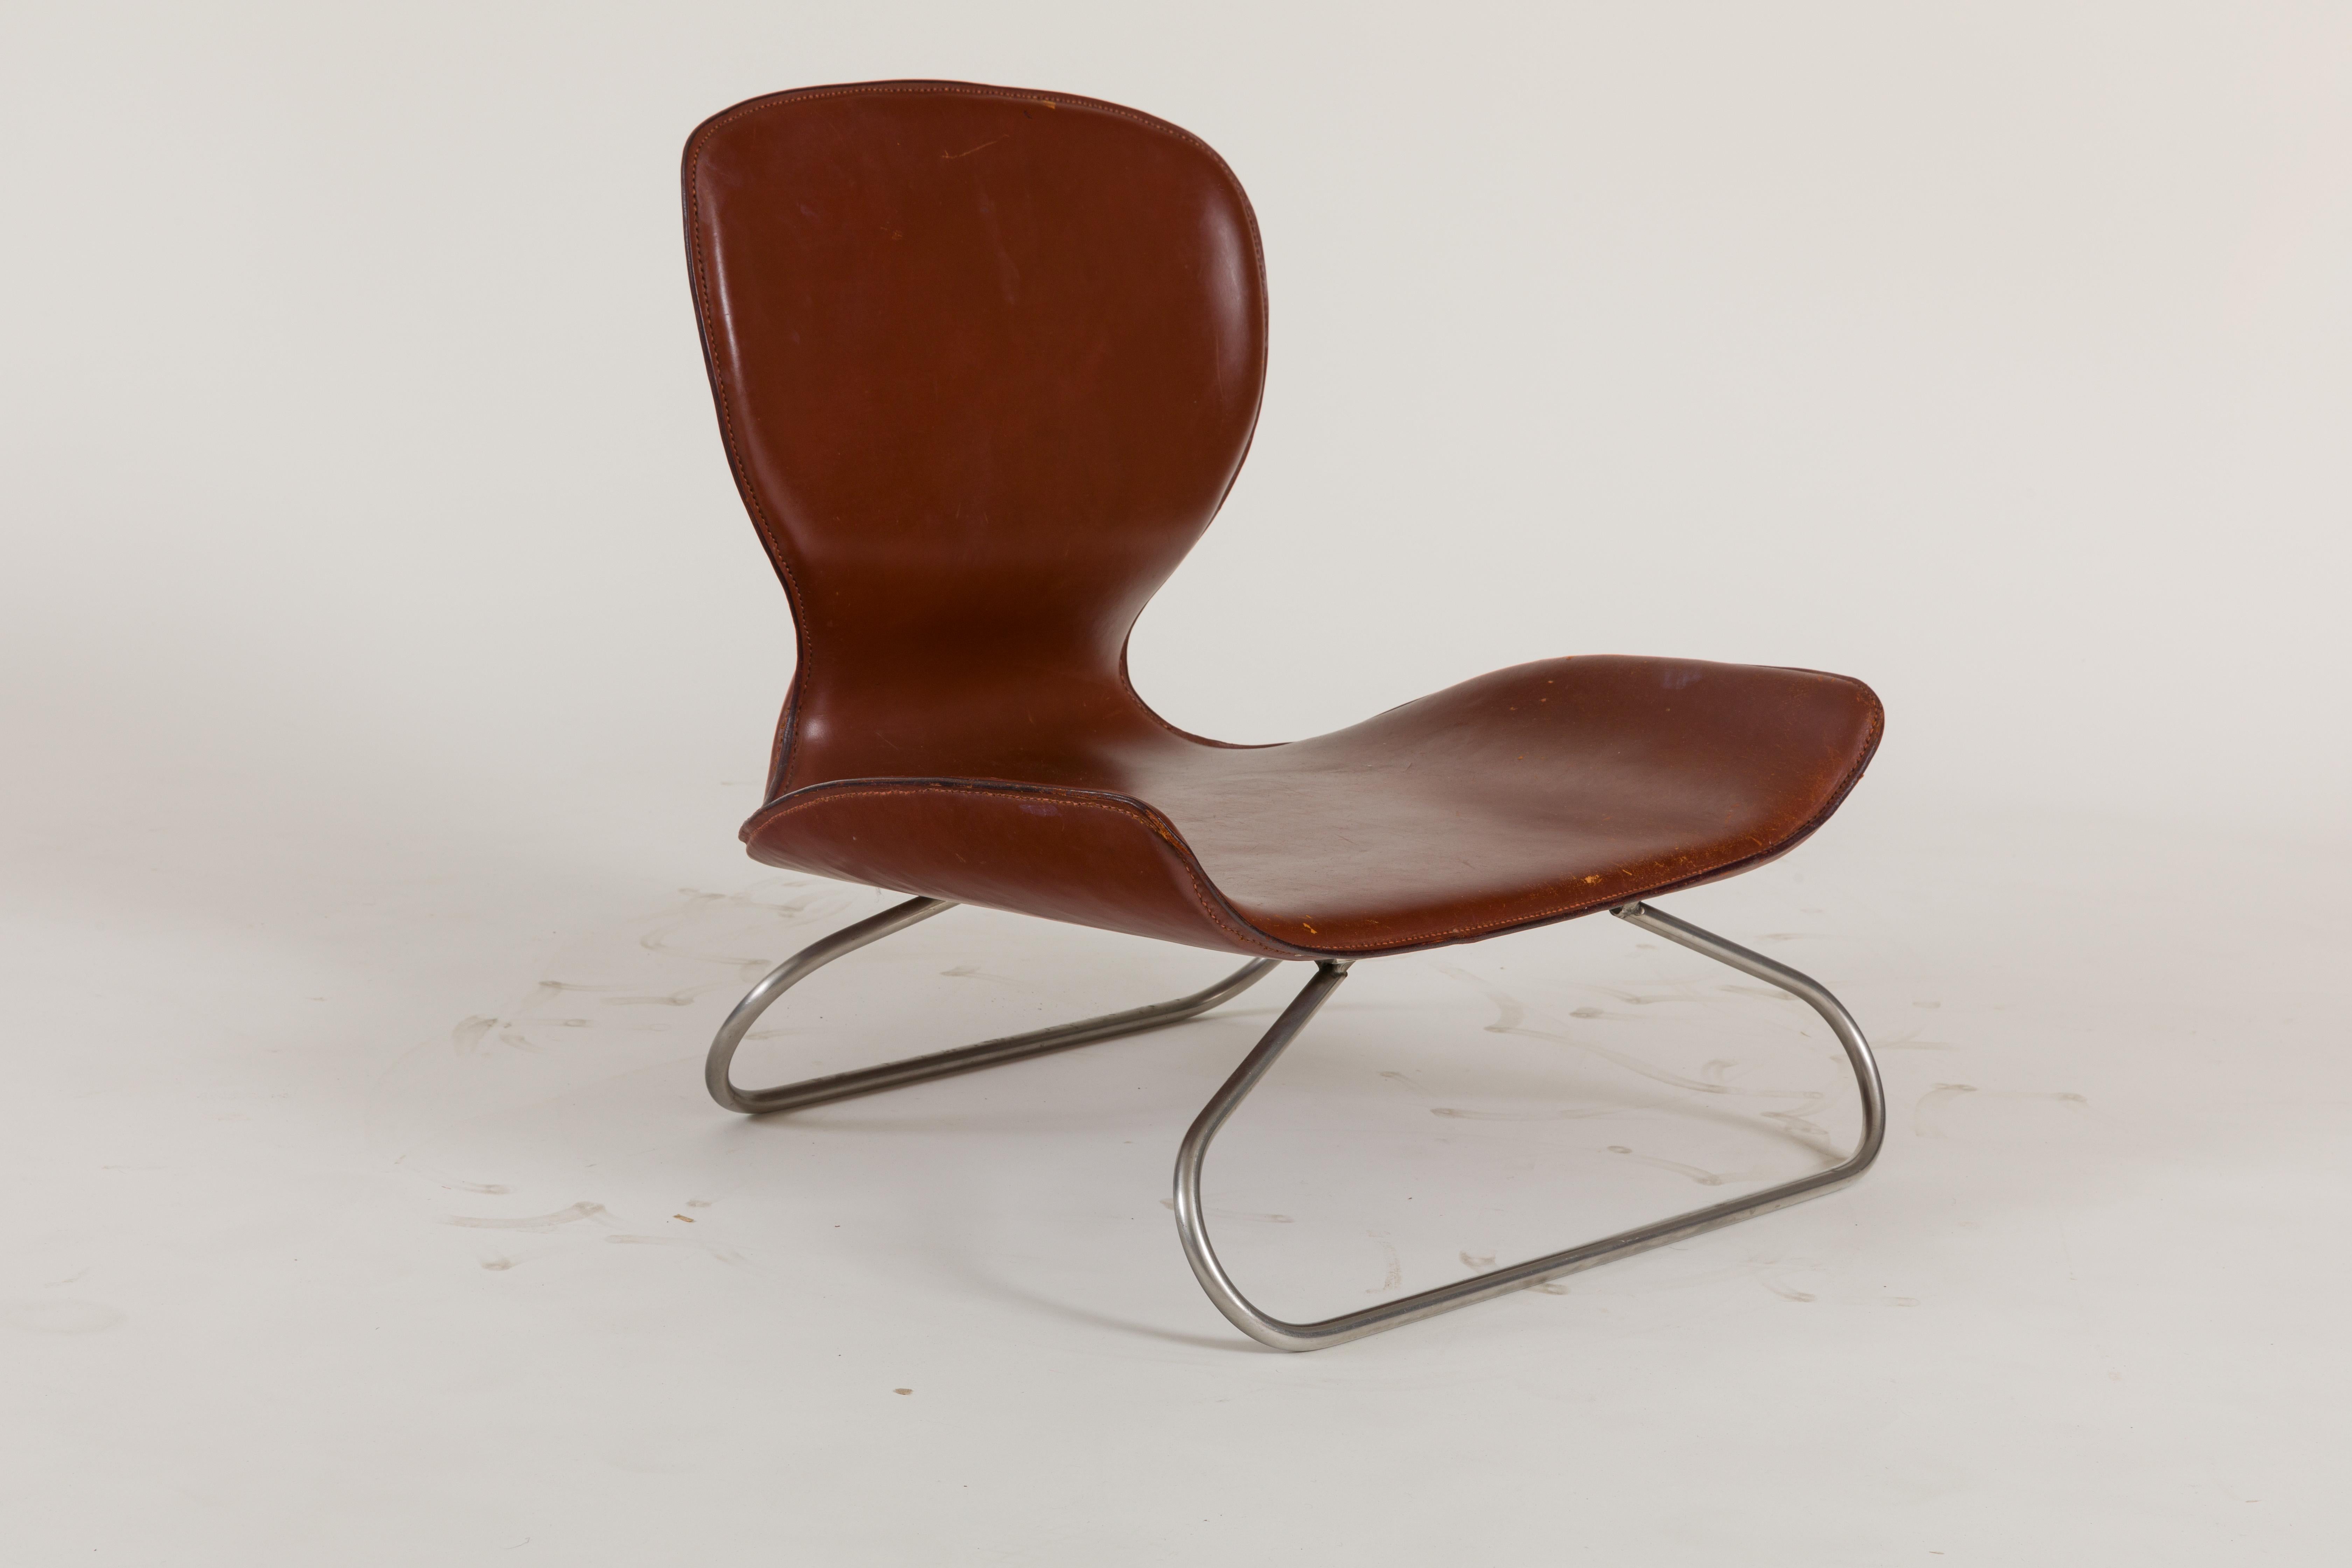 English K-3 Low Leather Chair by Kirsten Jones & Adam Bottomley for KOI, England, 2000s For Sale